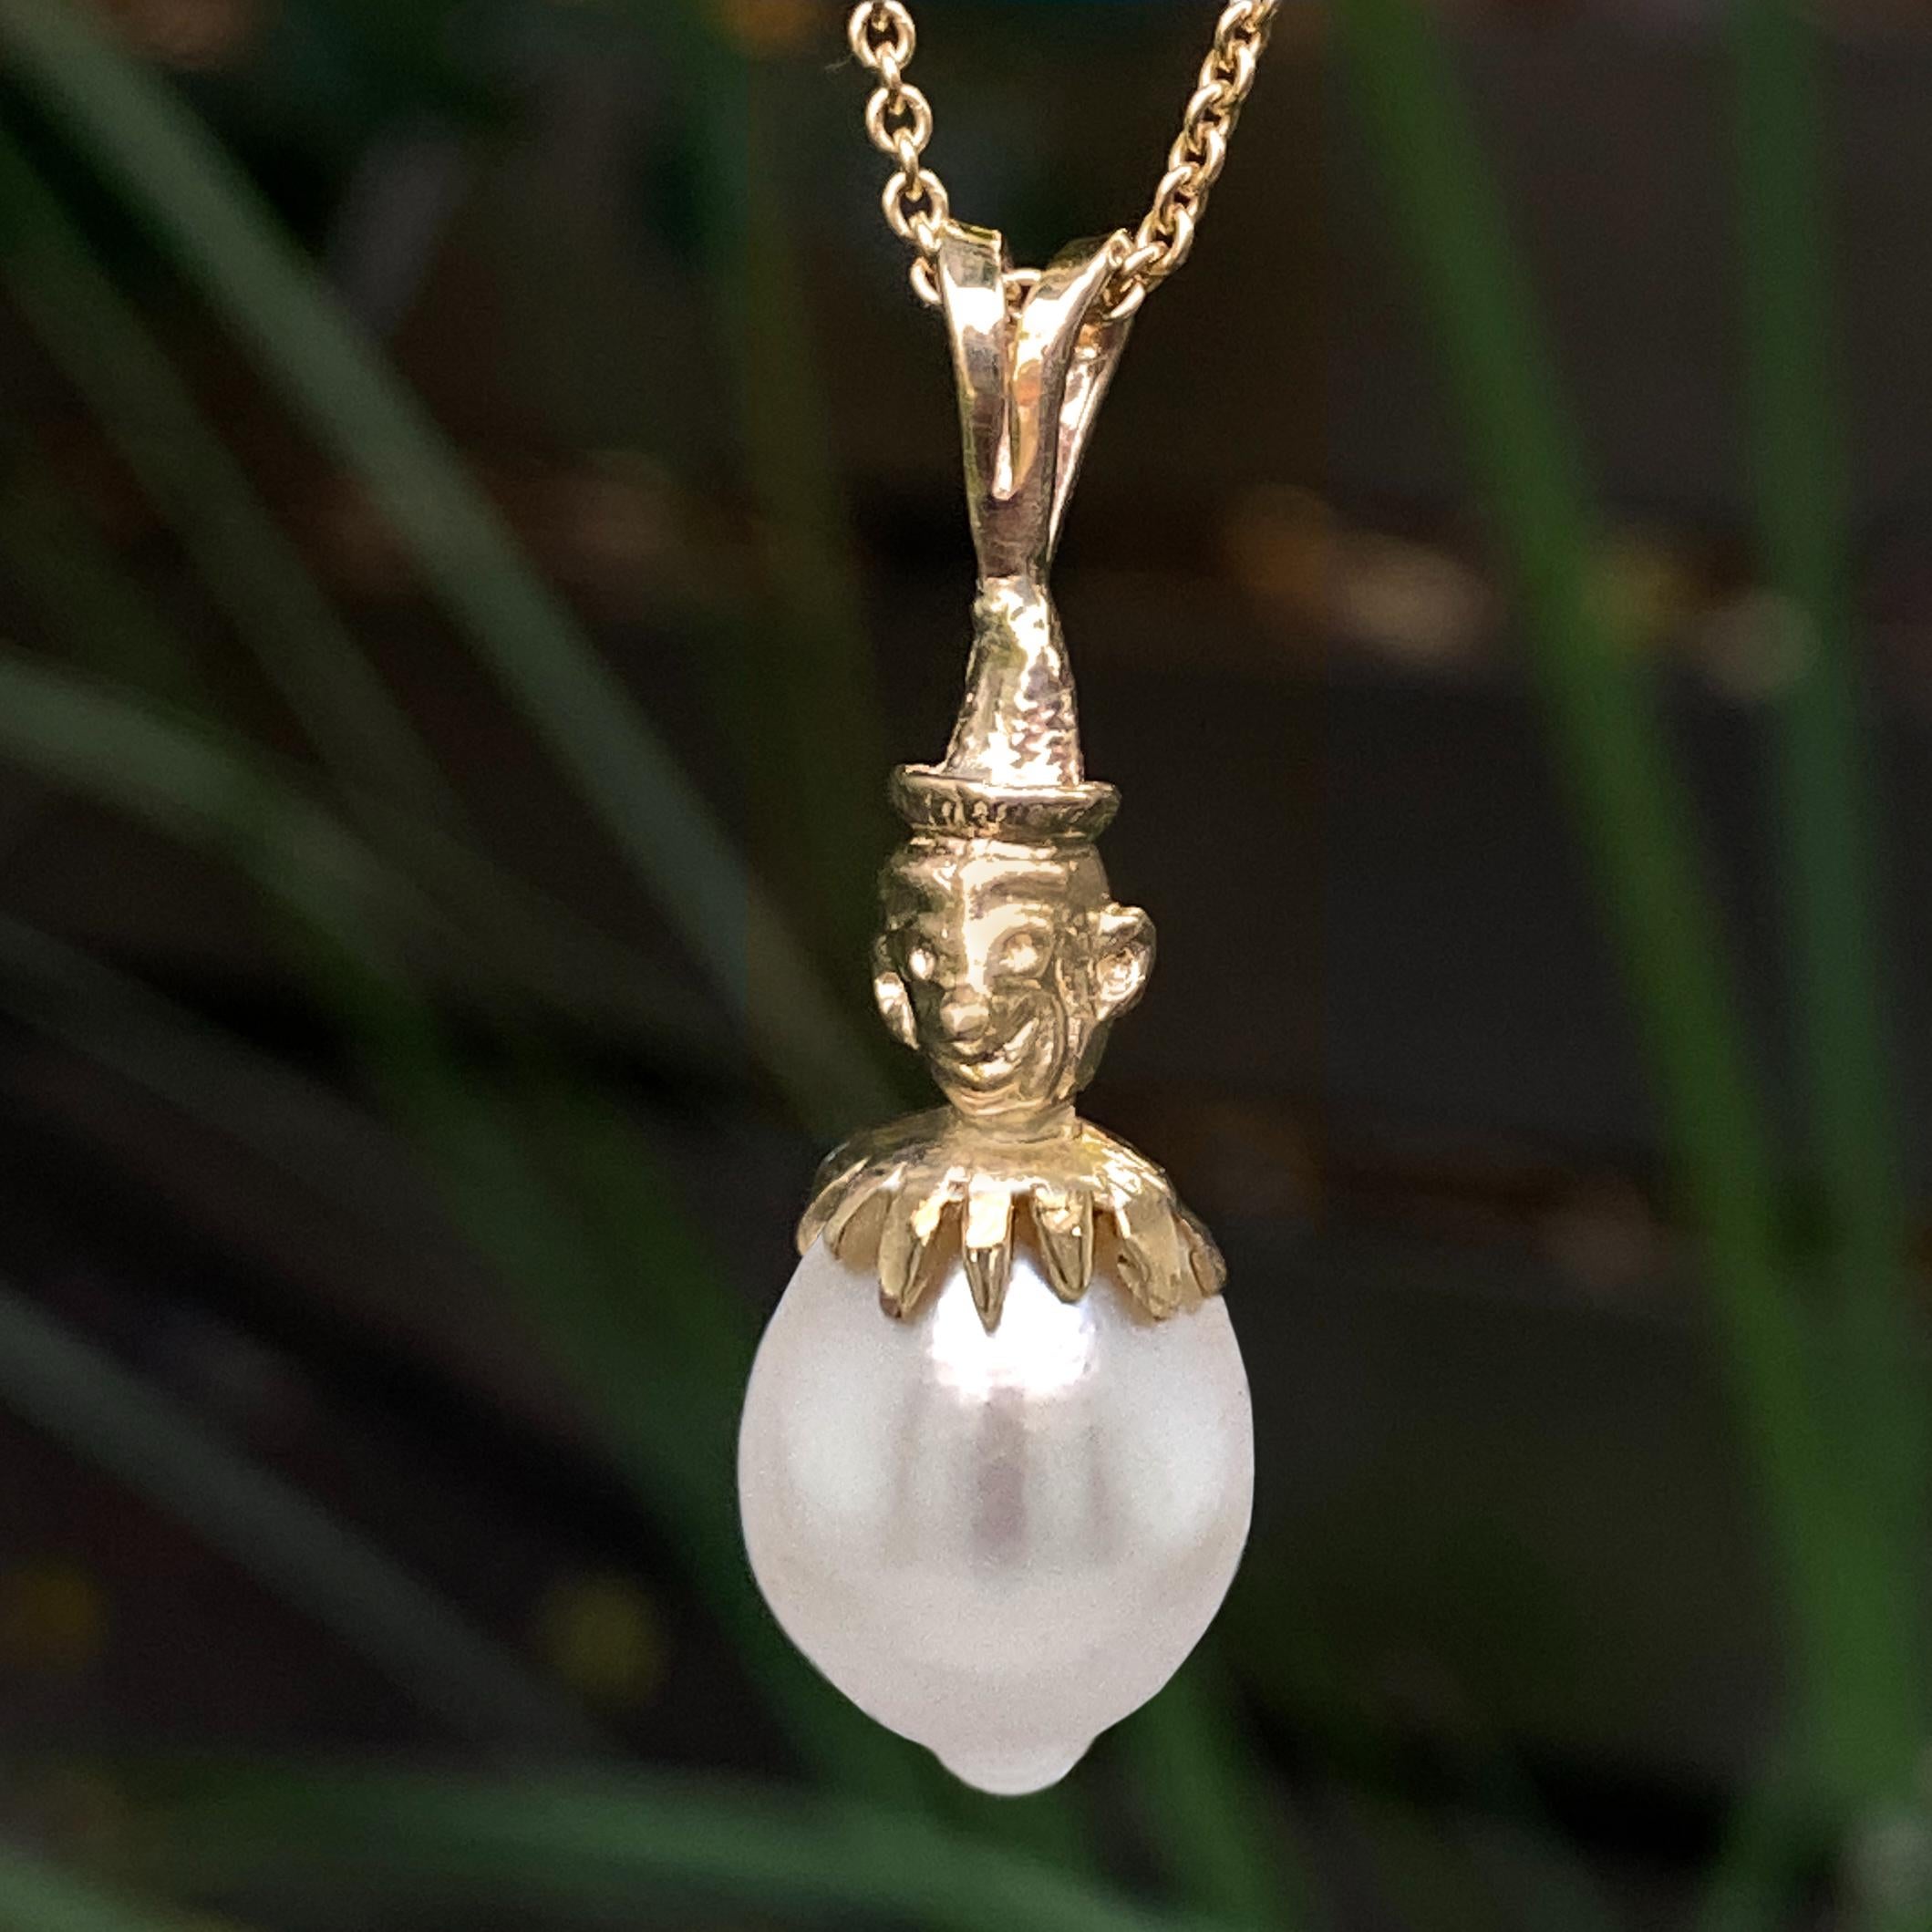 We found the perfect cap for this adorably dimpled baroque south sea pearl:  the top of a vintage articulated clown pendant!  

We had this pendant for a while, but it's frankly sort of creepy, and the world doesn't need any more creepy articulated